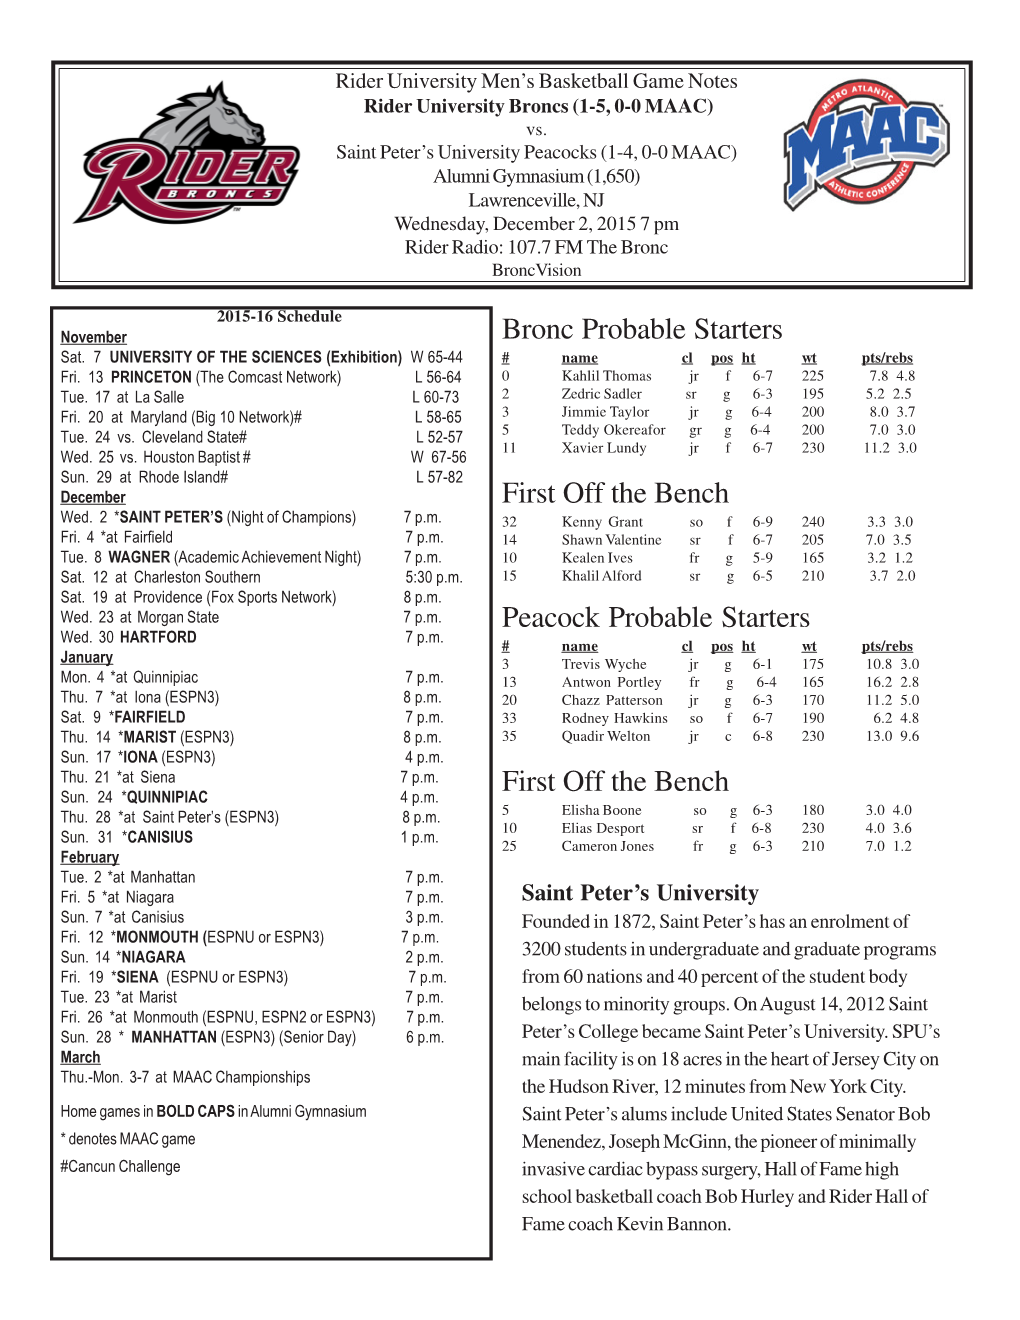 2015-16 Game Notes.Pmd